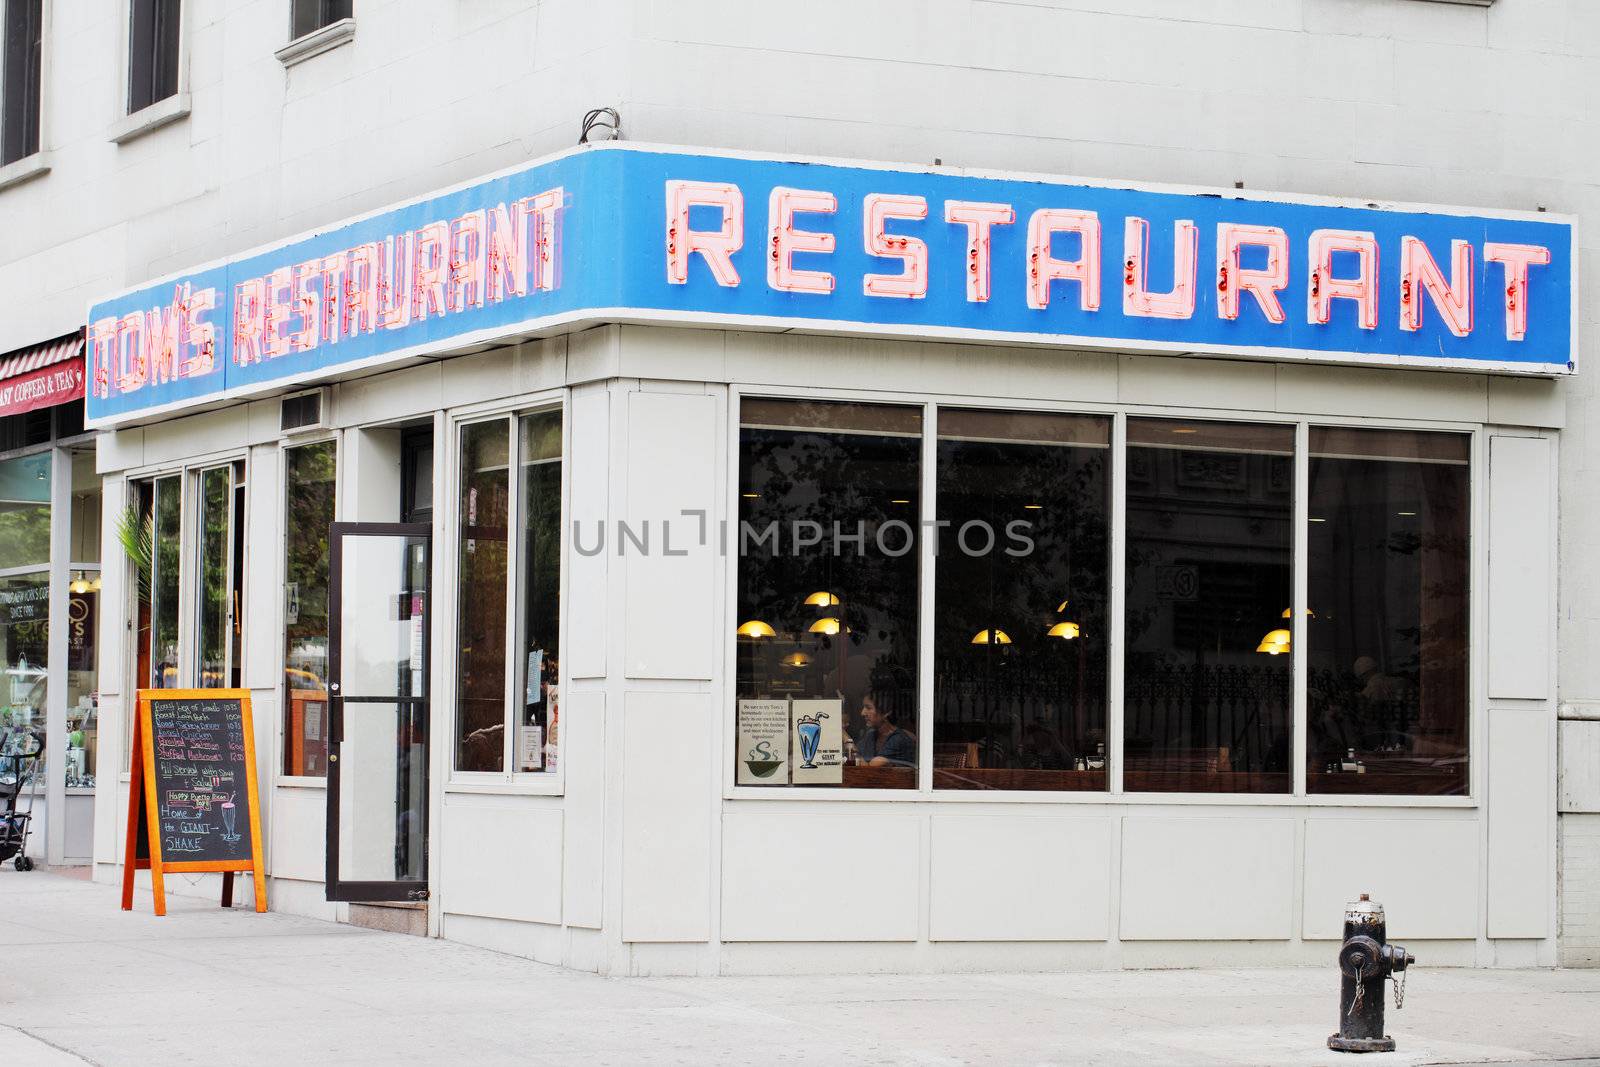 NEW YORK CITY, USA - JUNE 10: Tom's Restaurant. Its exterior was used as a stand-in for the fictional Monk's Caf� in the popular television sitcom Seinfeld. June 10, 2012 in New York City, USA